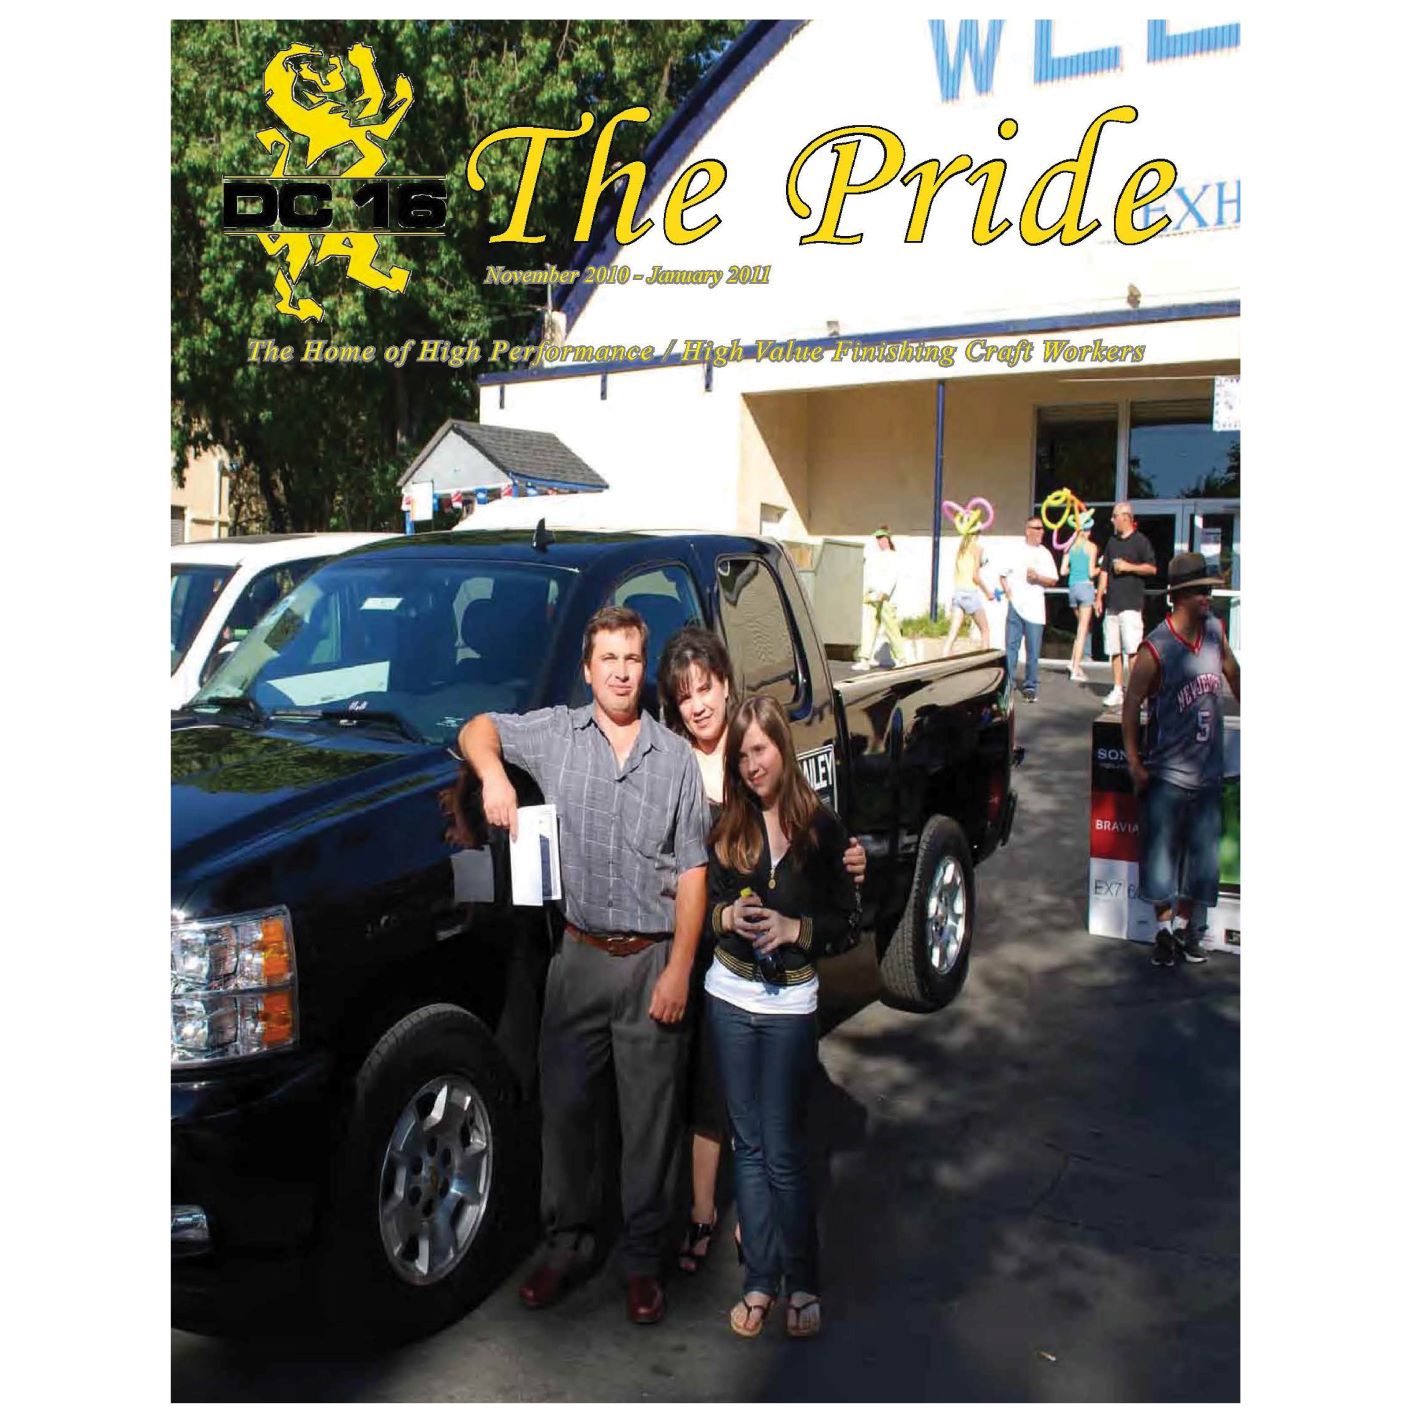 Image from the Gallery: The Pride November 2010 – January 2011